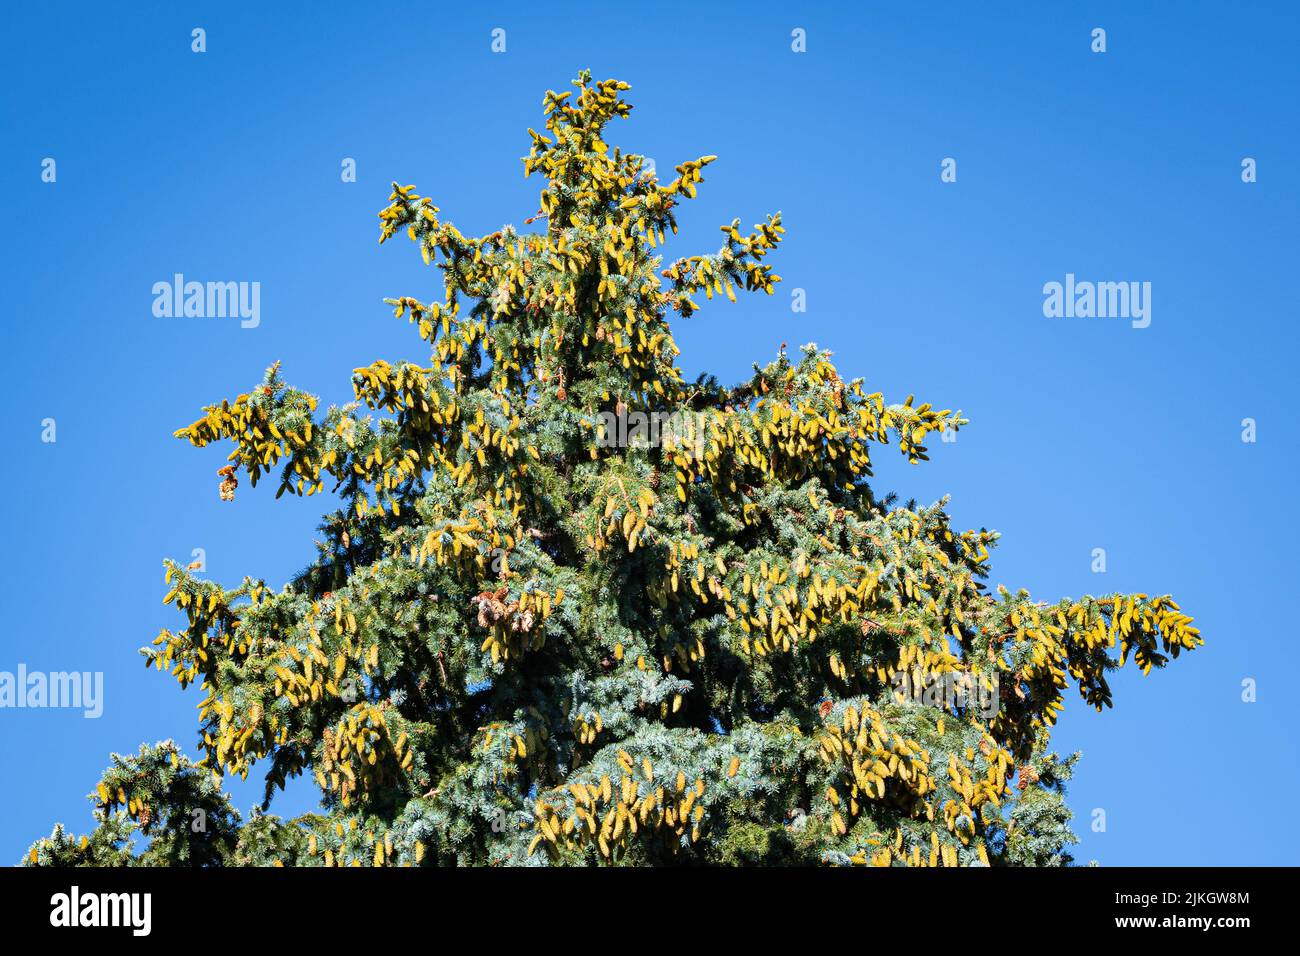 Top of a tall blue spruce (Picea pungens glauca) tree with many ripening yellow cones. Stock Photo